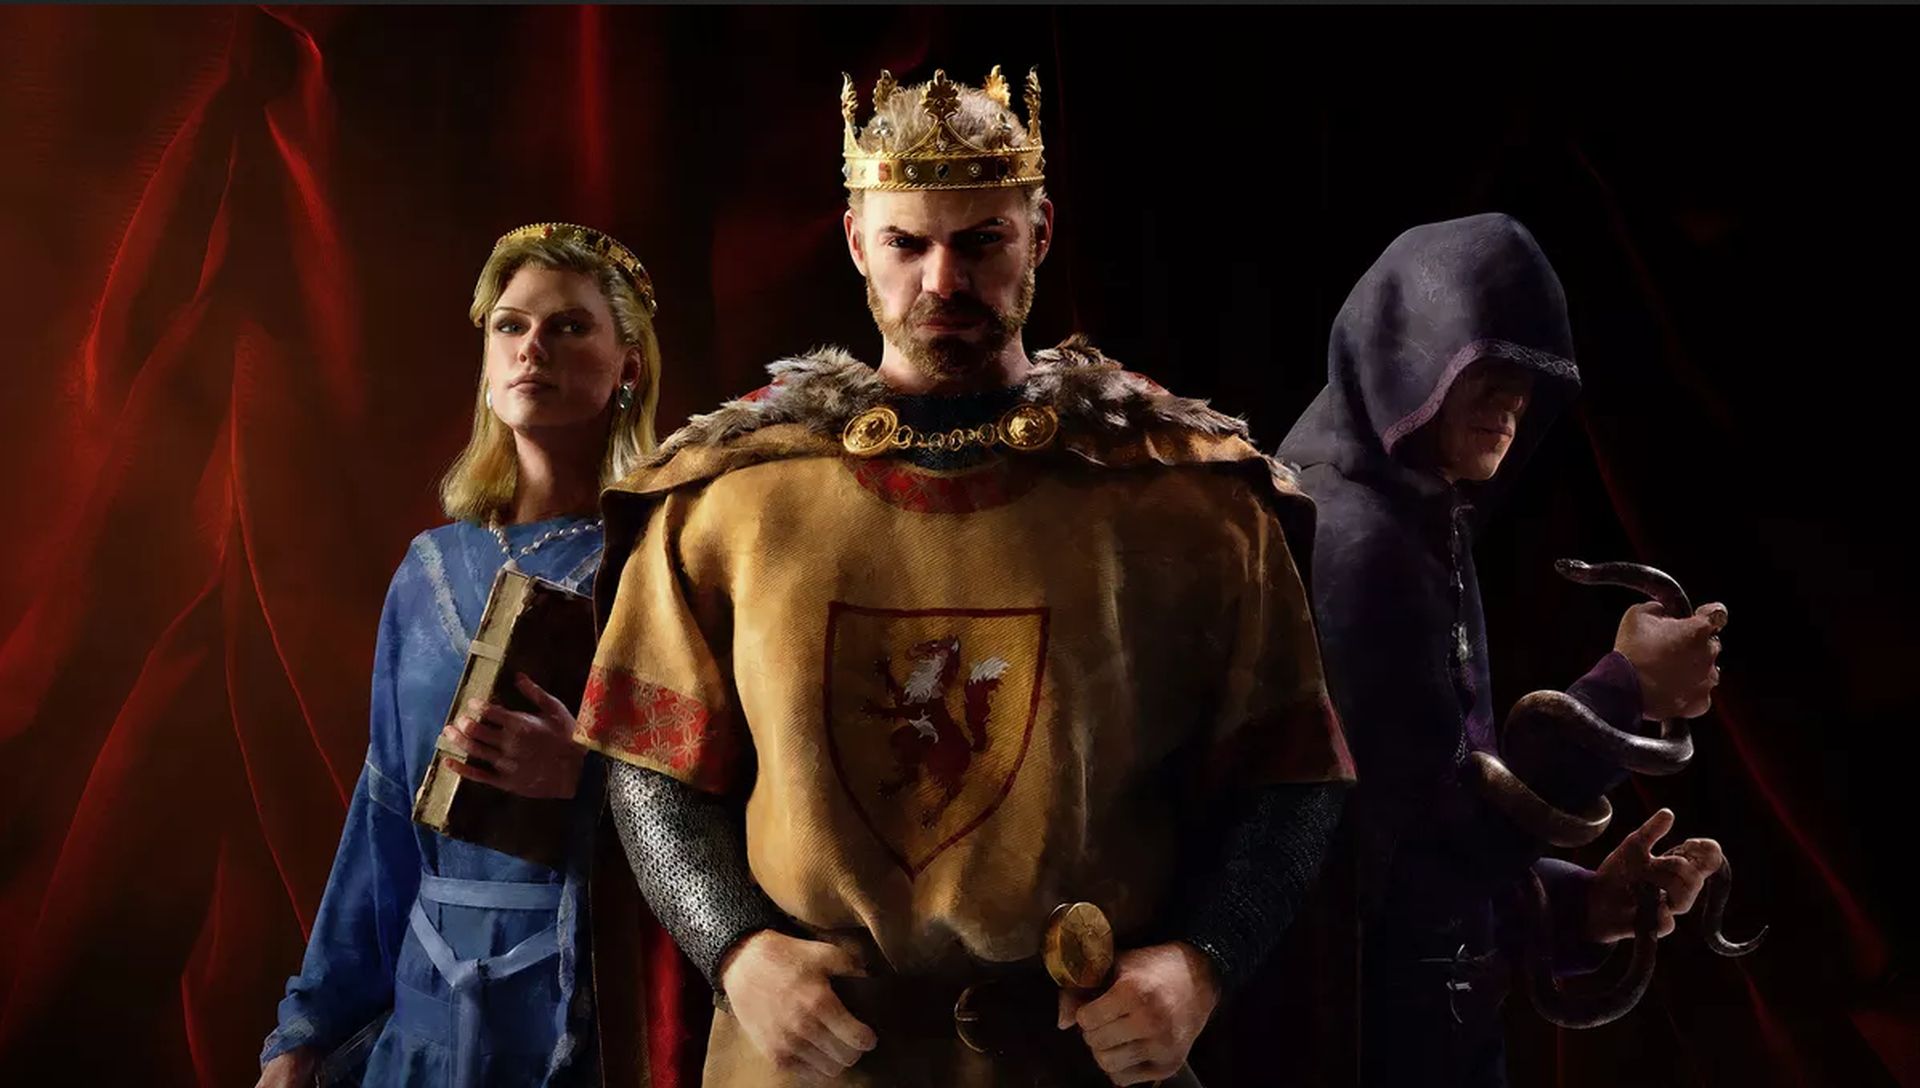 Crusader Kings 3 Details Modding, Ai, And More In Latest Video Update